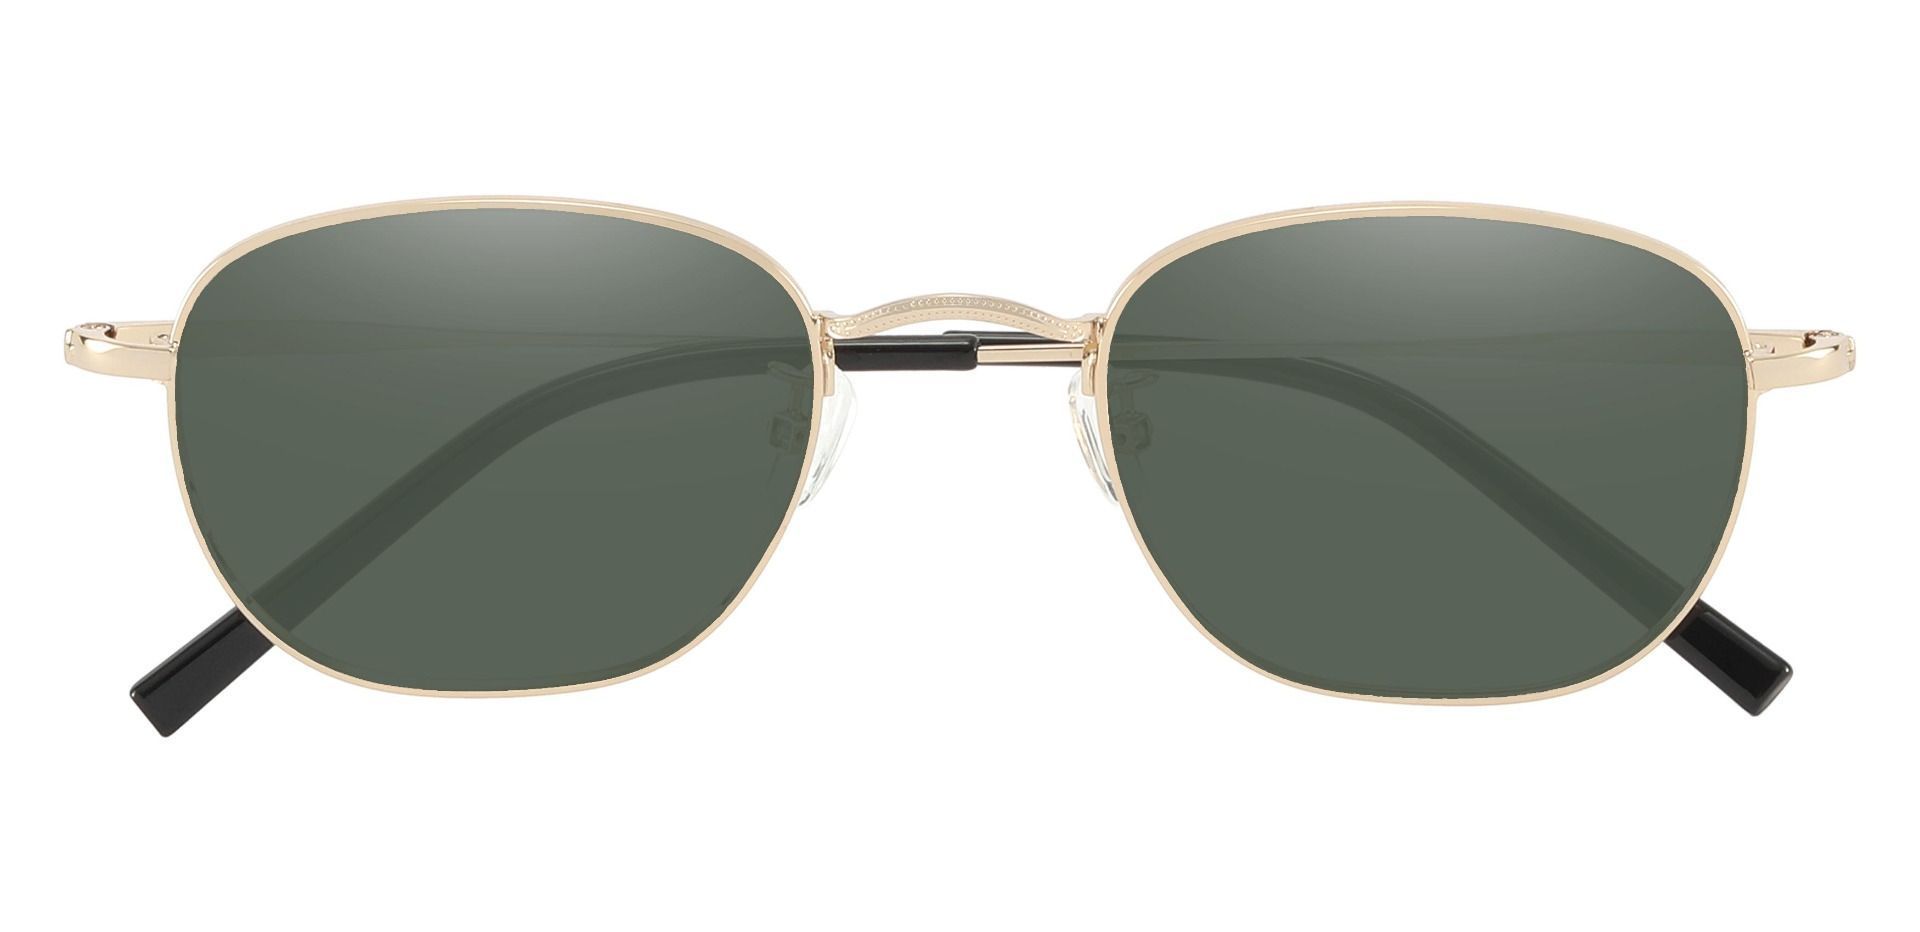 Greece Square Lined Bifocal Sunglasses - Gold Frame With Green Lenses